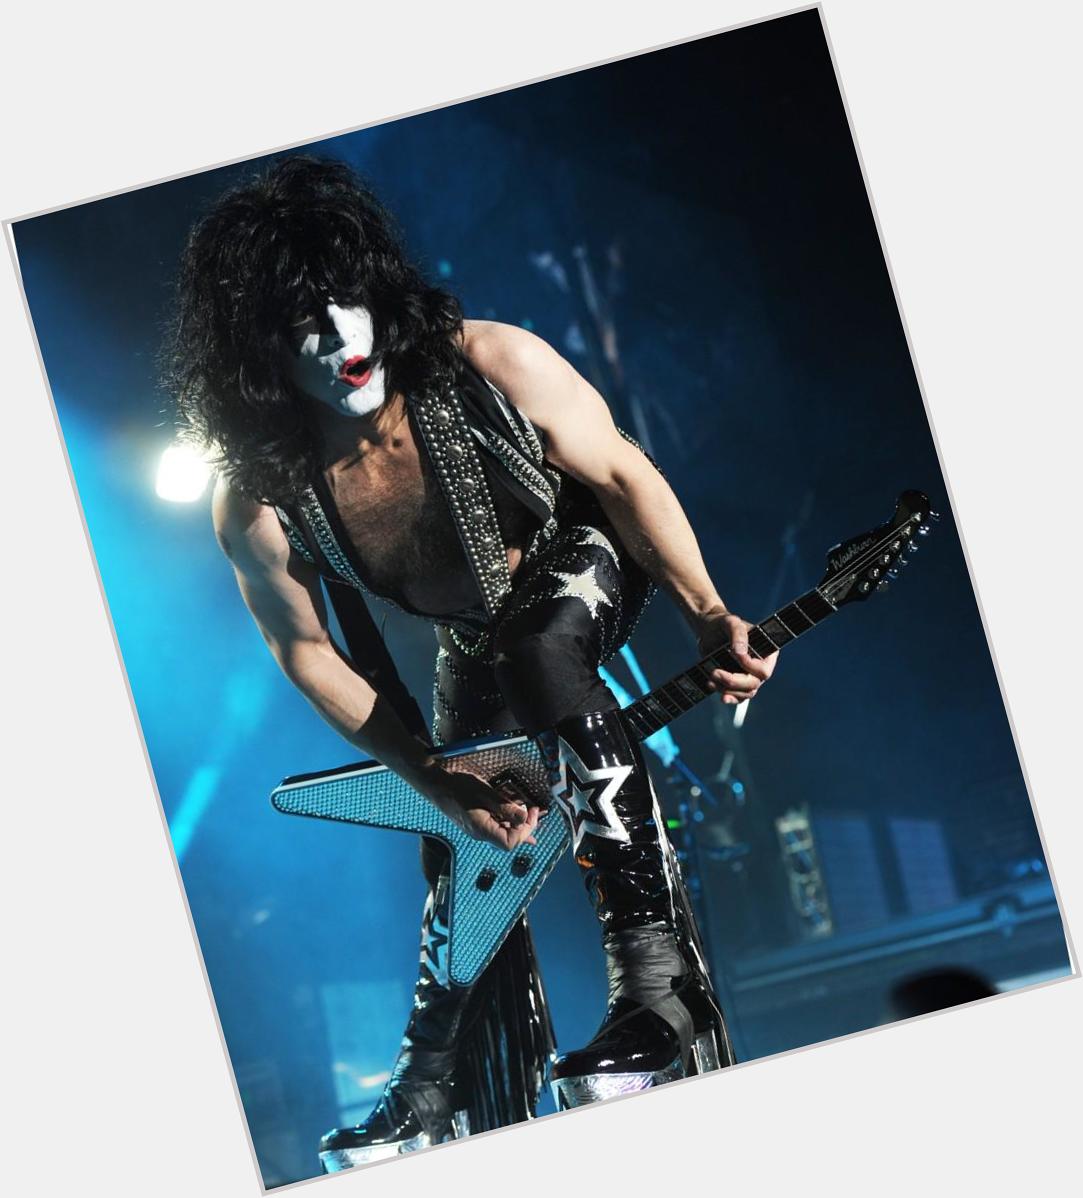 Happy Birthday to Paul Stanley, who turns 63 today! 